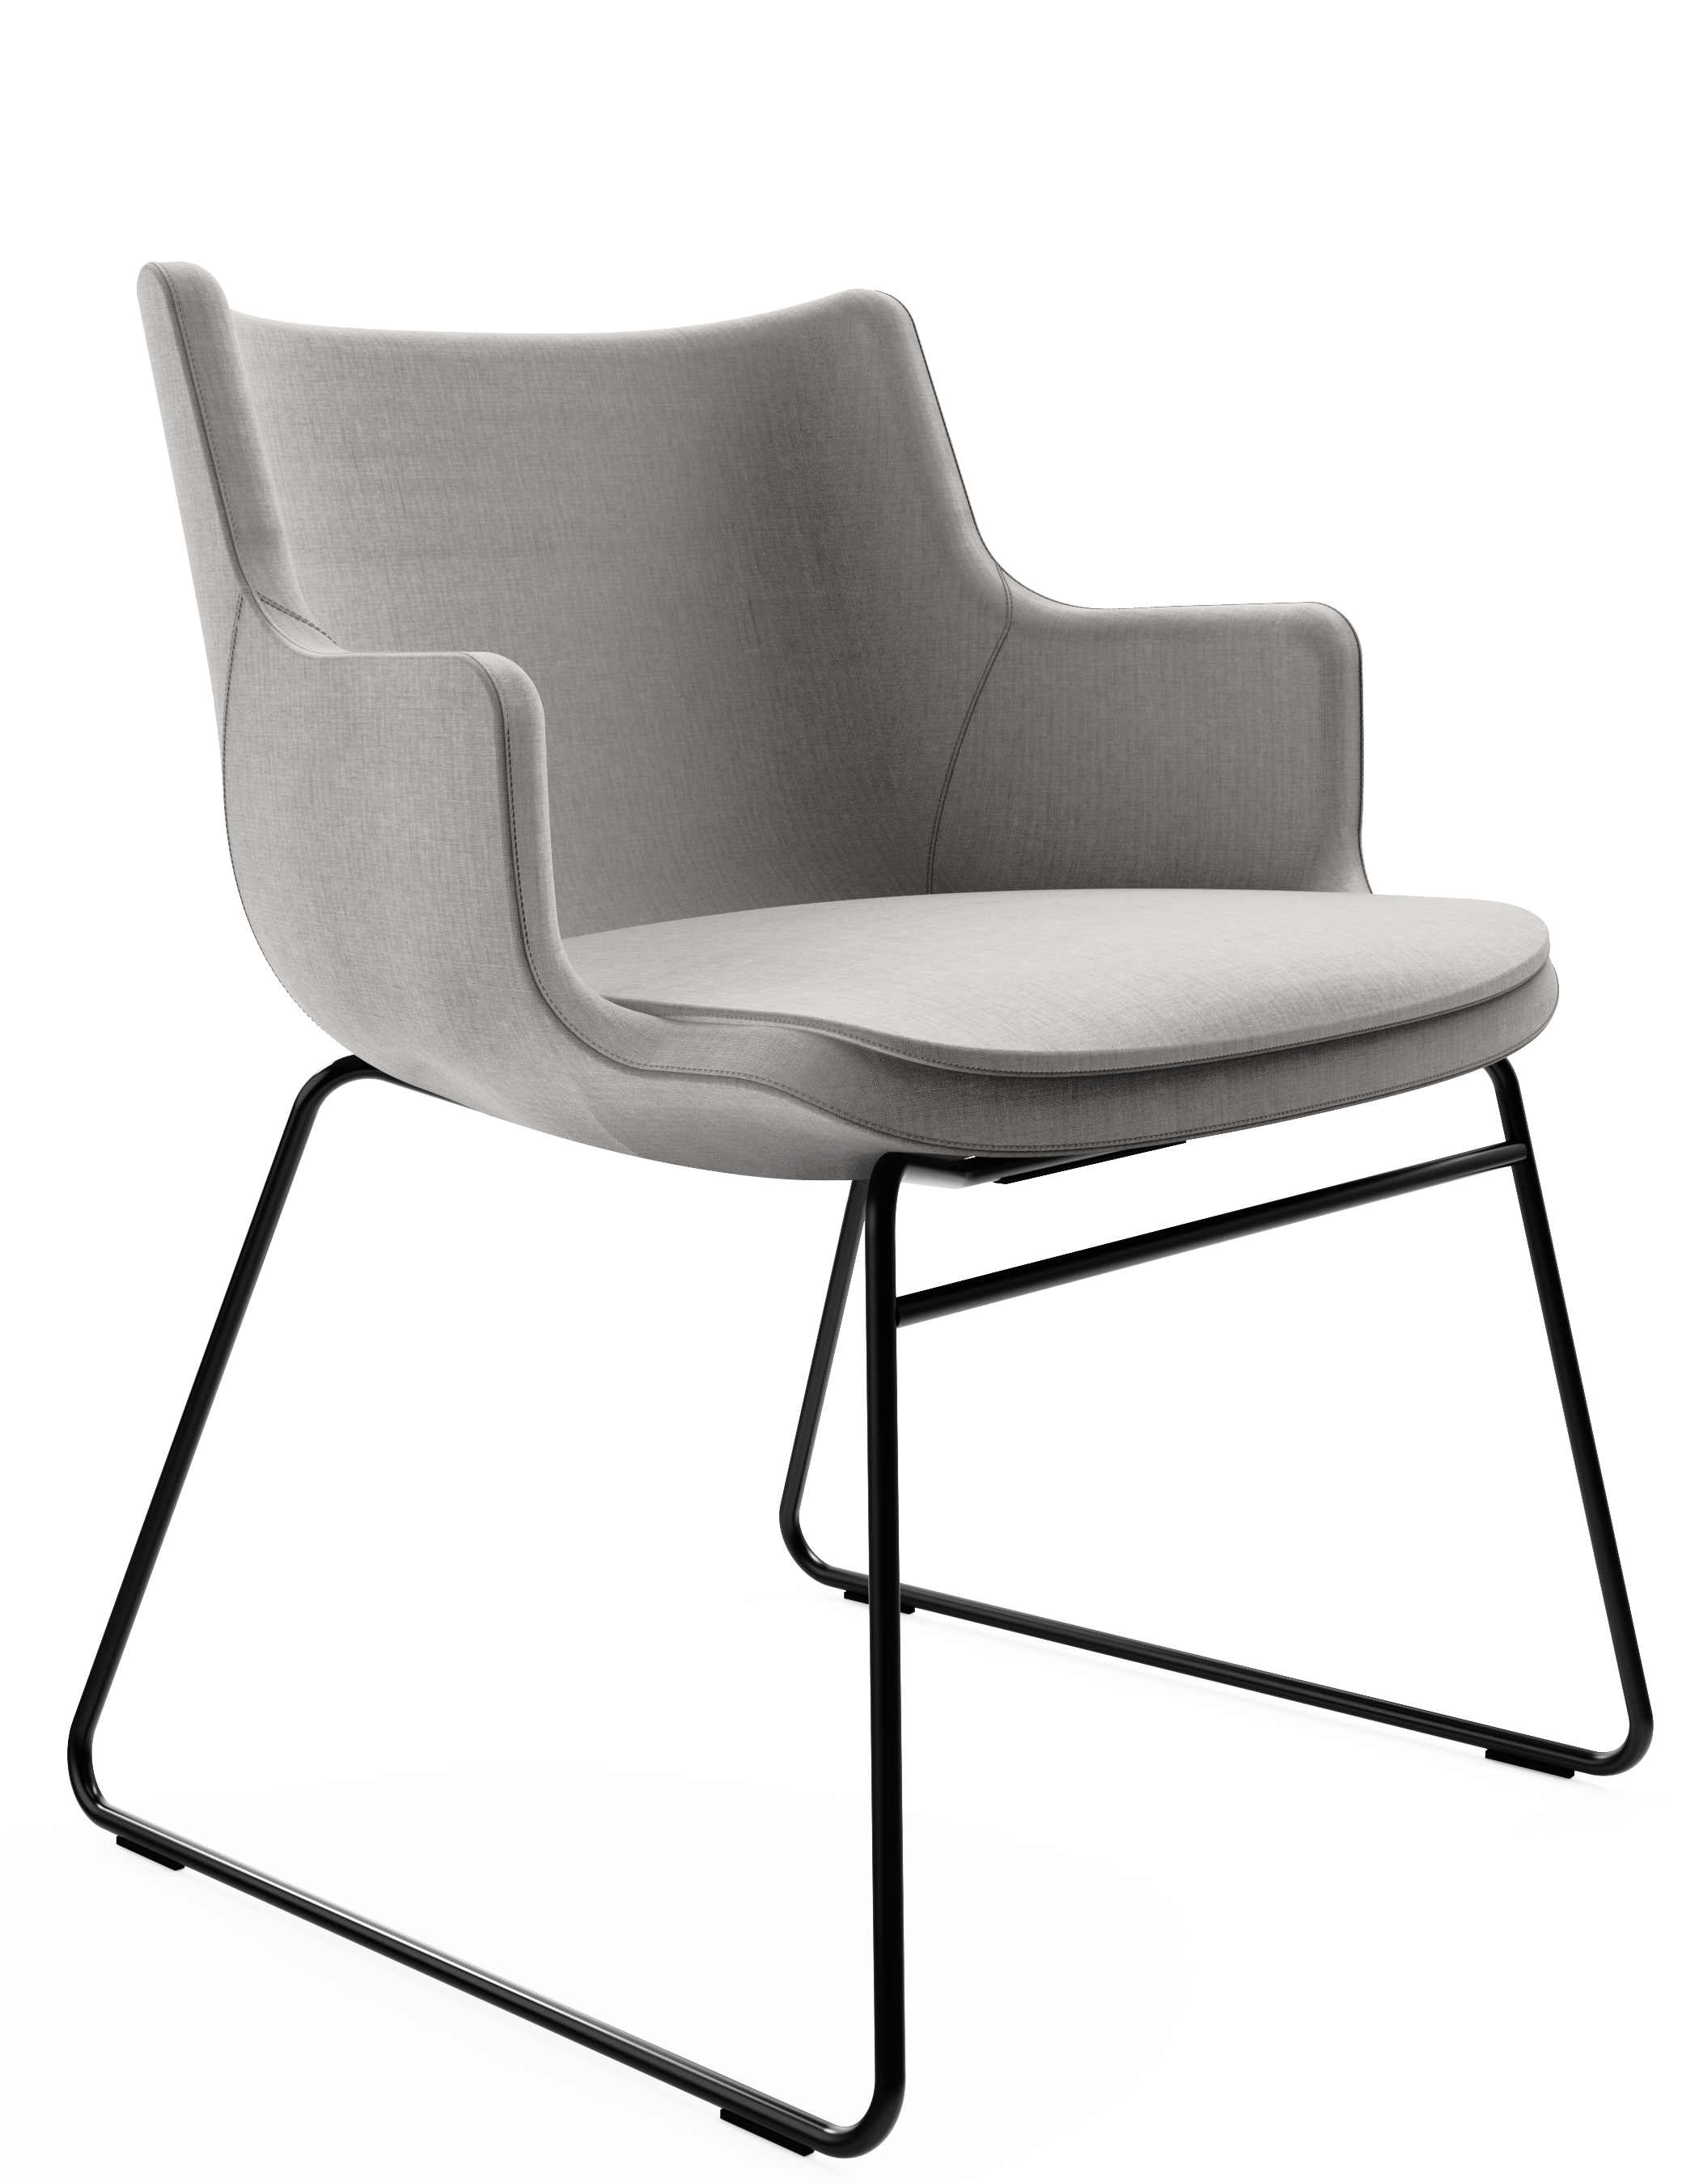 WS - Contour chair - Low, Sled black base (Front angle)